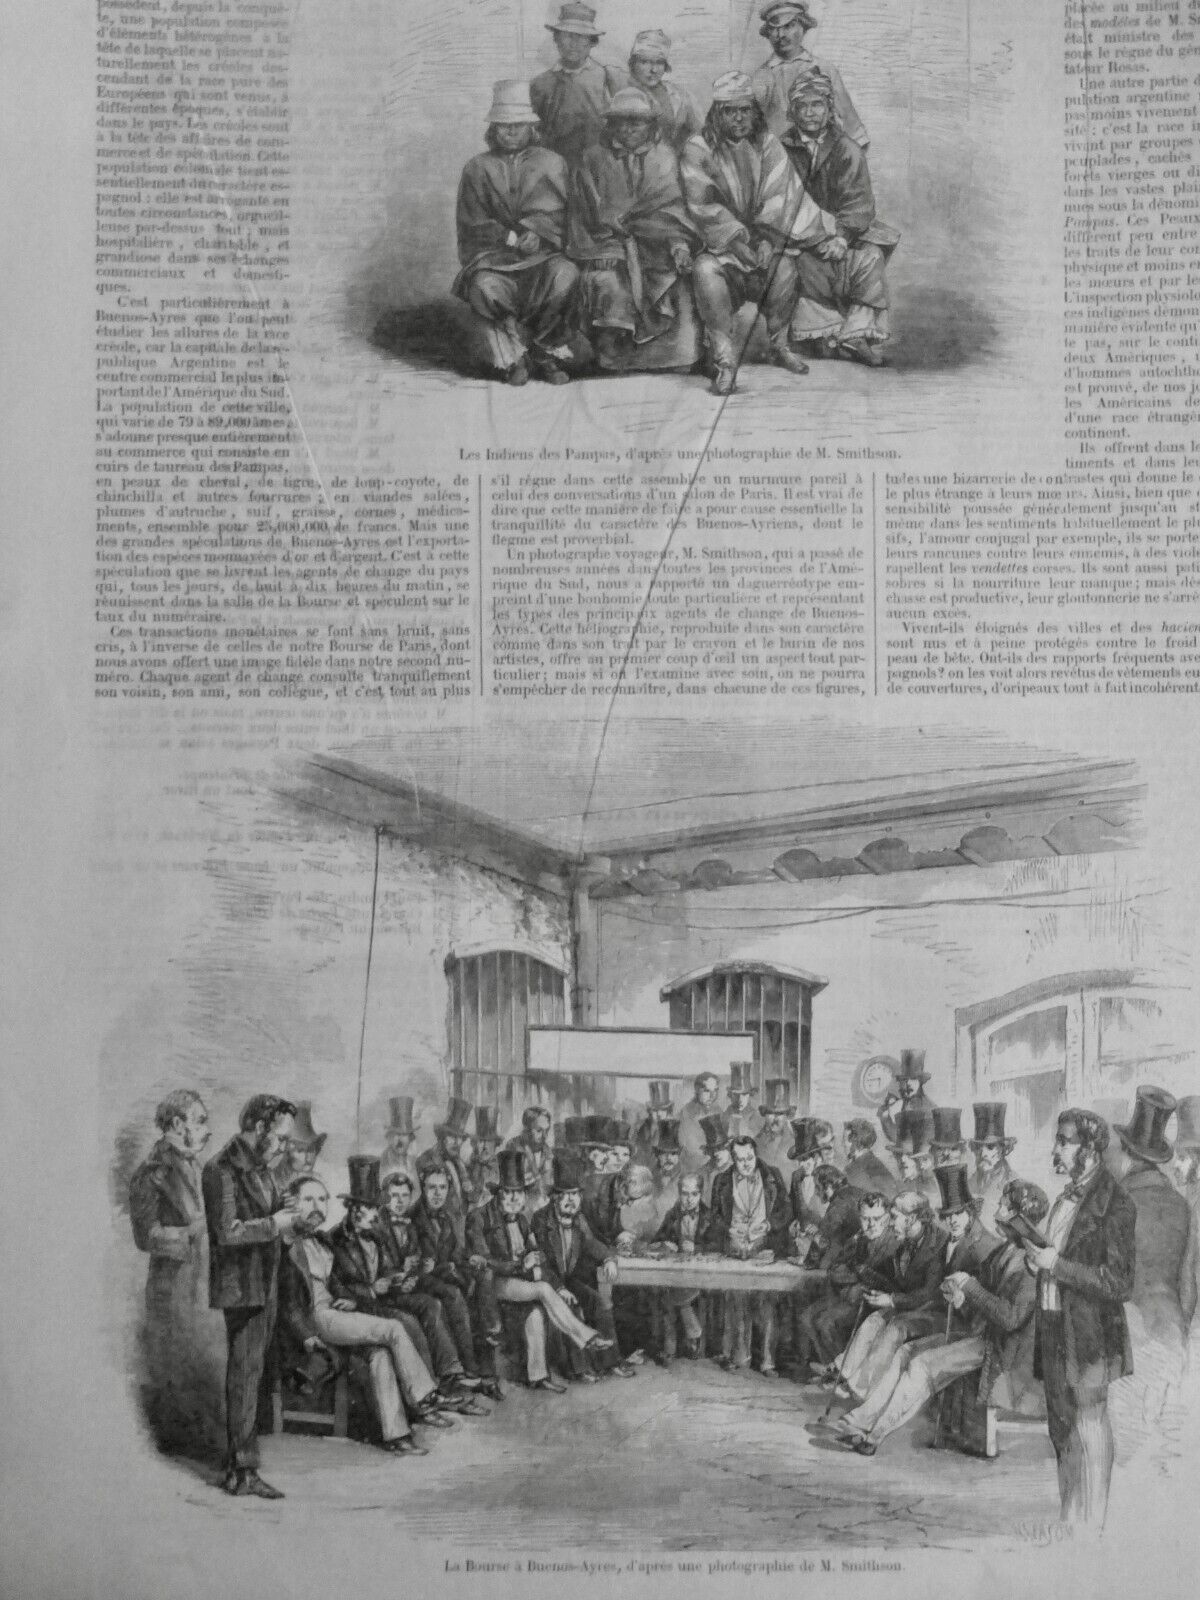 1857 Mid Purse Buenos Aires Indians Photograph M.Smithson 1 Journal Old